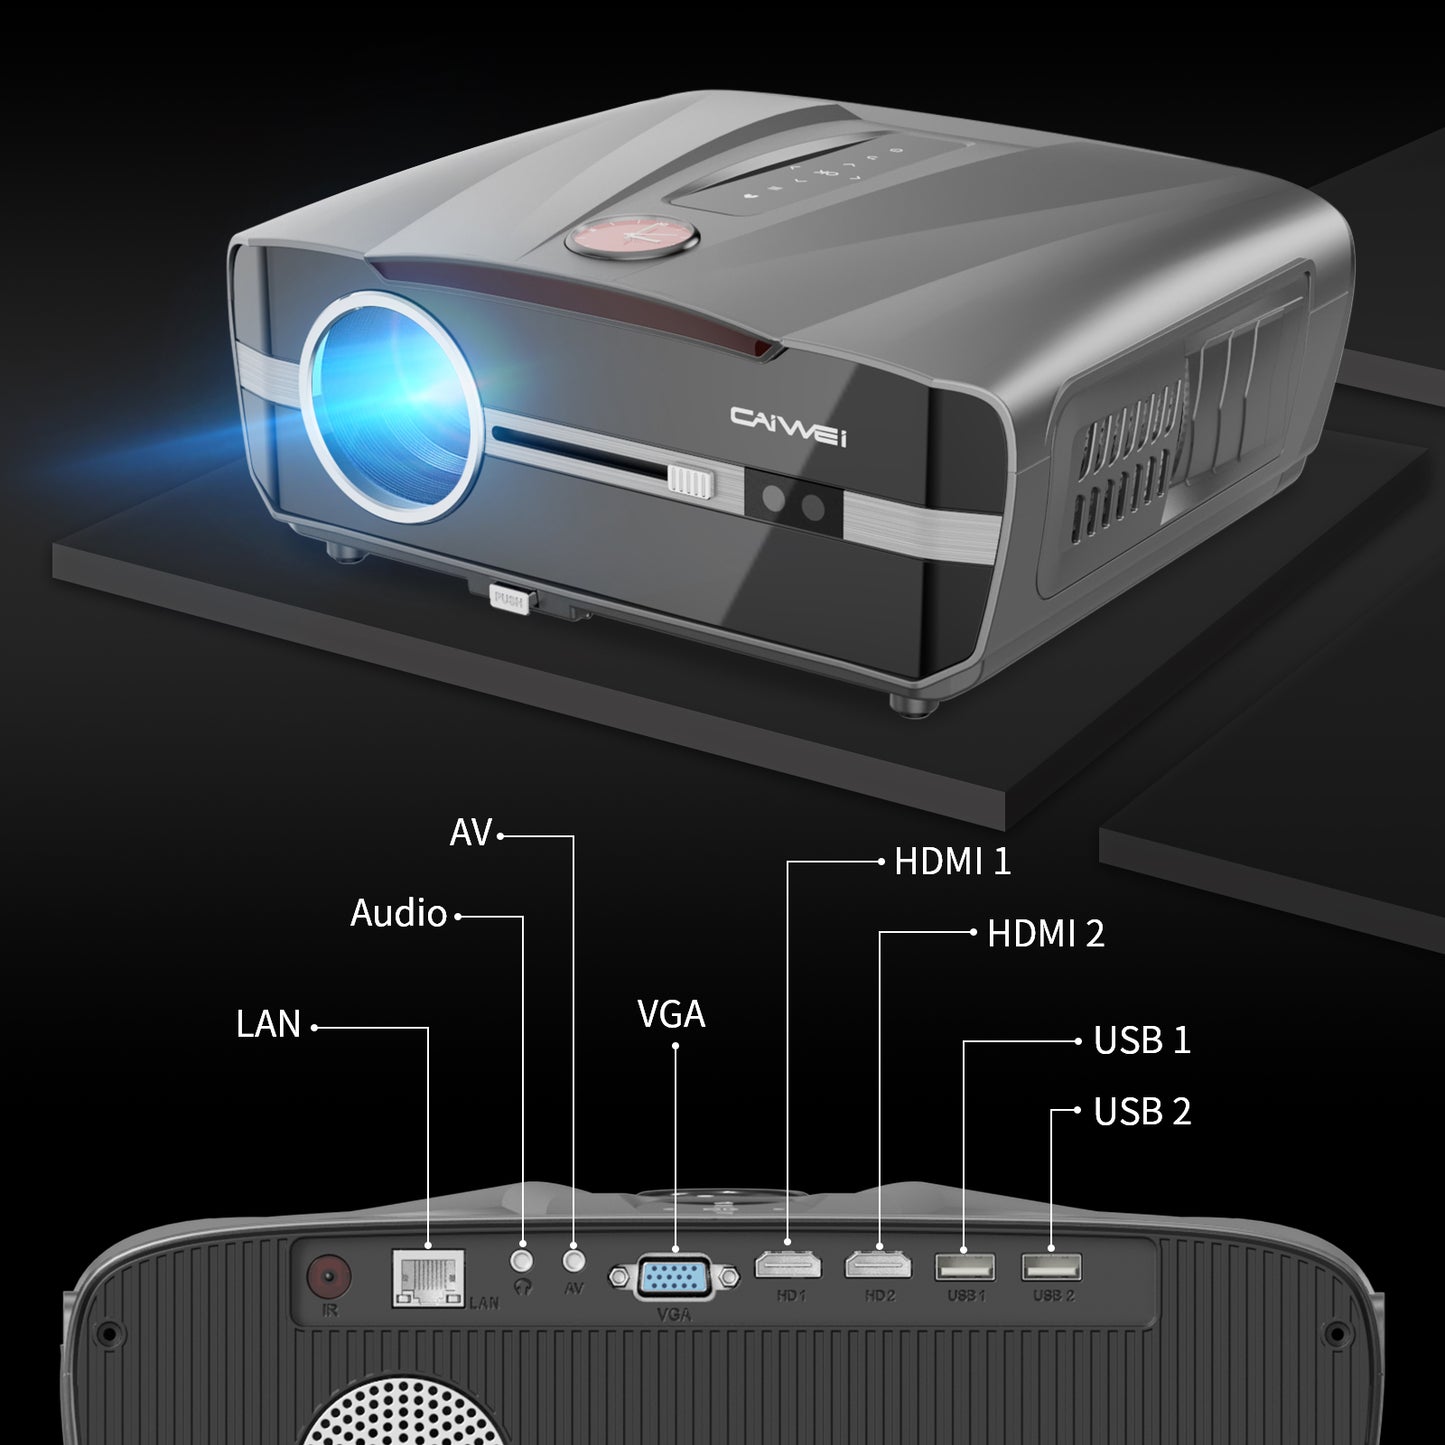 AUTO Focus 4K Projector Daytime Viewing, 1200 ANSI Outdoor Projector 300” Screen, Android TV Projector with WiFi 6 and Bluetooth, Auto Keystone Projector Outdoor, For TV Stick/iOS/Android/PC/HDMI/PPT